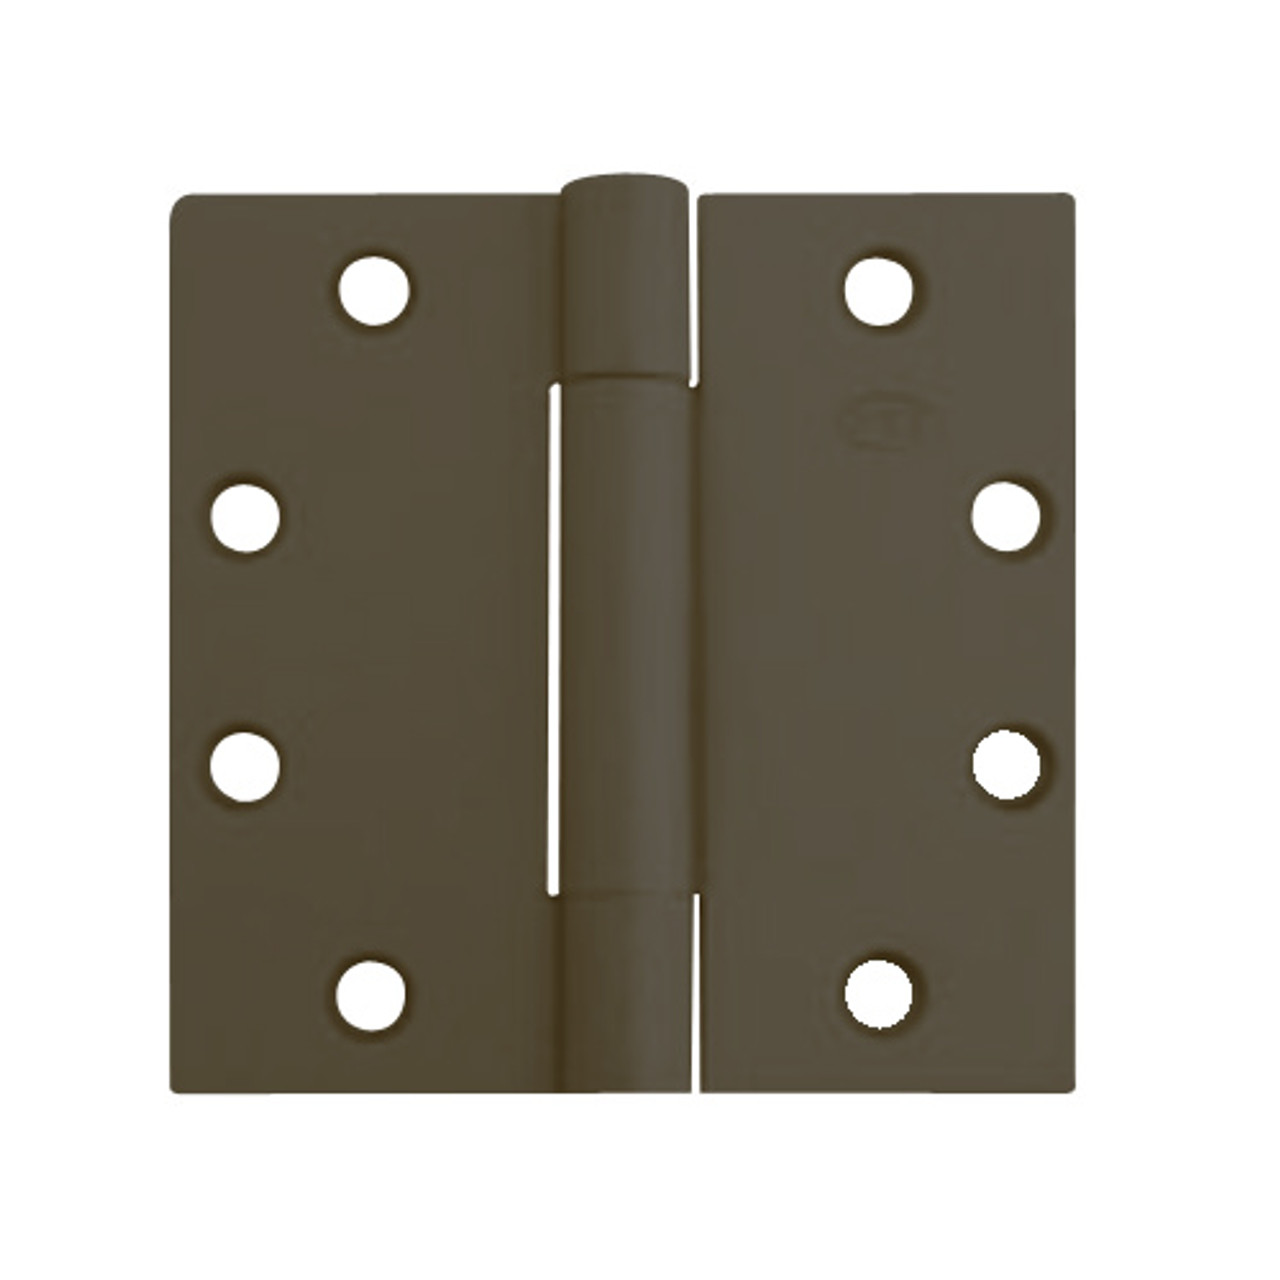 3CB1-5x5-641-TW4 IVES 3 Knuckle Concealed Bearing Full Mortise Hinge with Electric Thru-Wire in Oxidized Satin Bronze